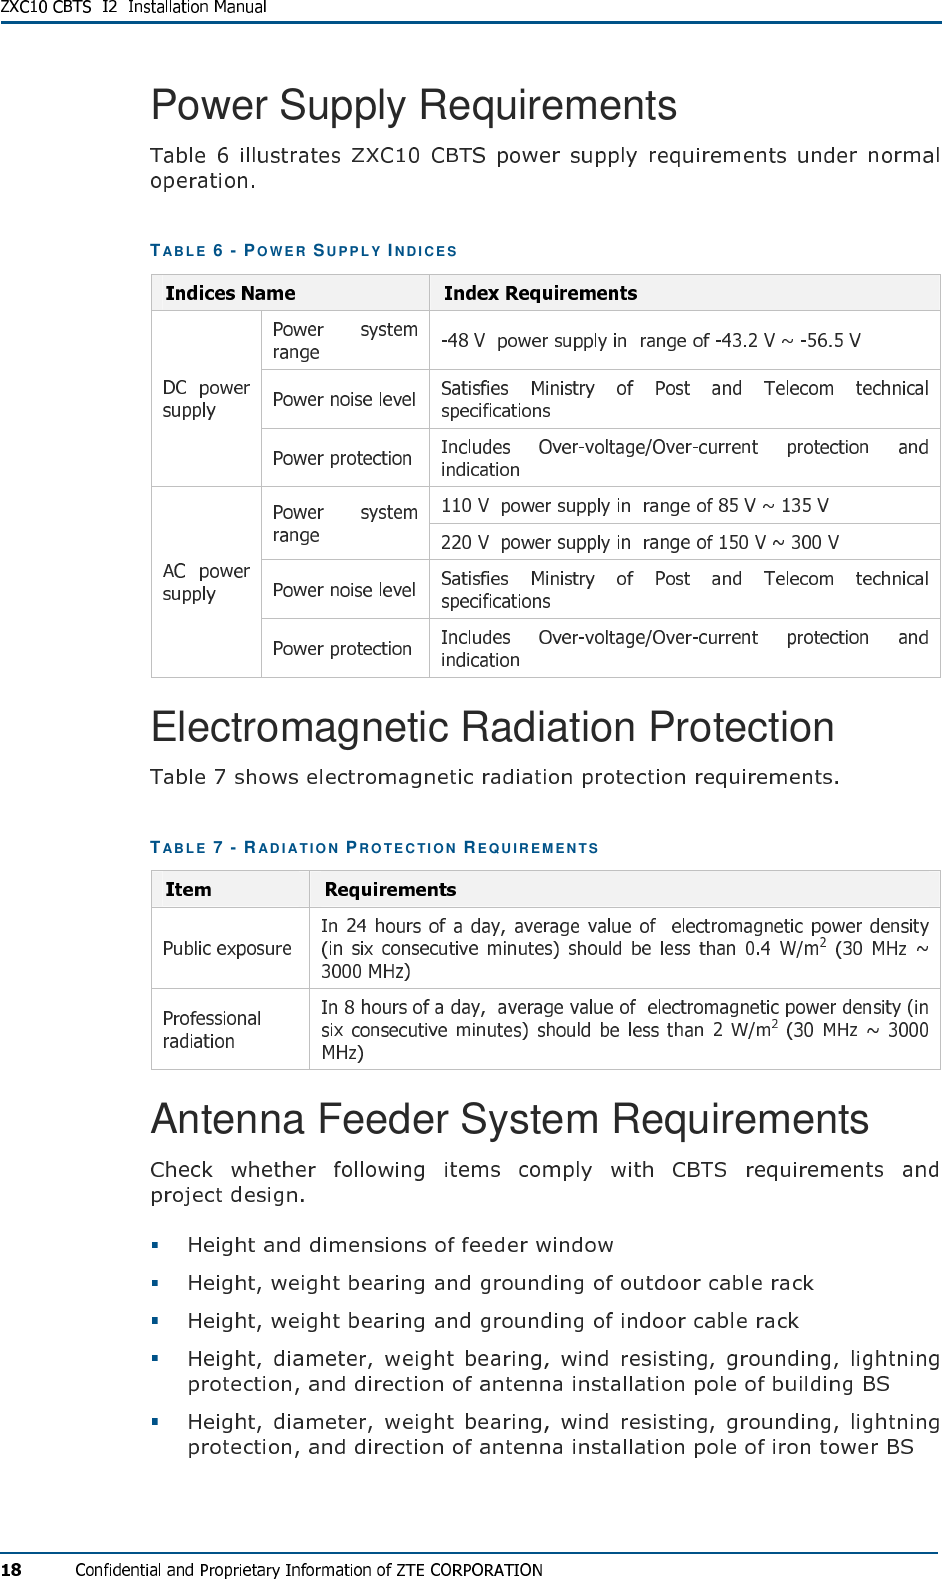 Power Supply Requirements TABL E  6 - PO W E R  SU PP L Y   IND I C E S    Electromagnetic Radiation Protection TABL E  7 - RAD I A T IO N  PR O T E C TI ON  RE Q U IR E M EN T S Antenna Feeder System Requirements      